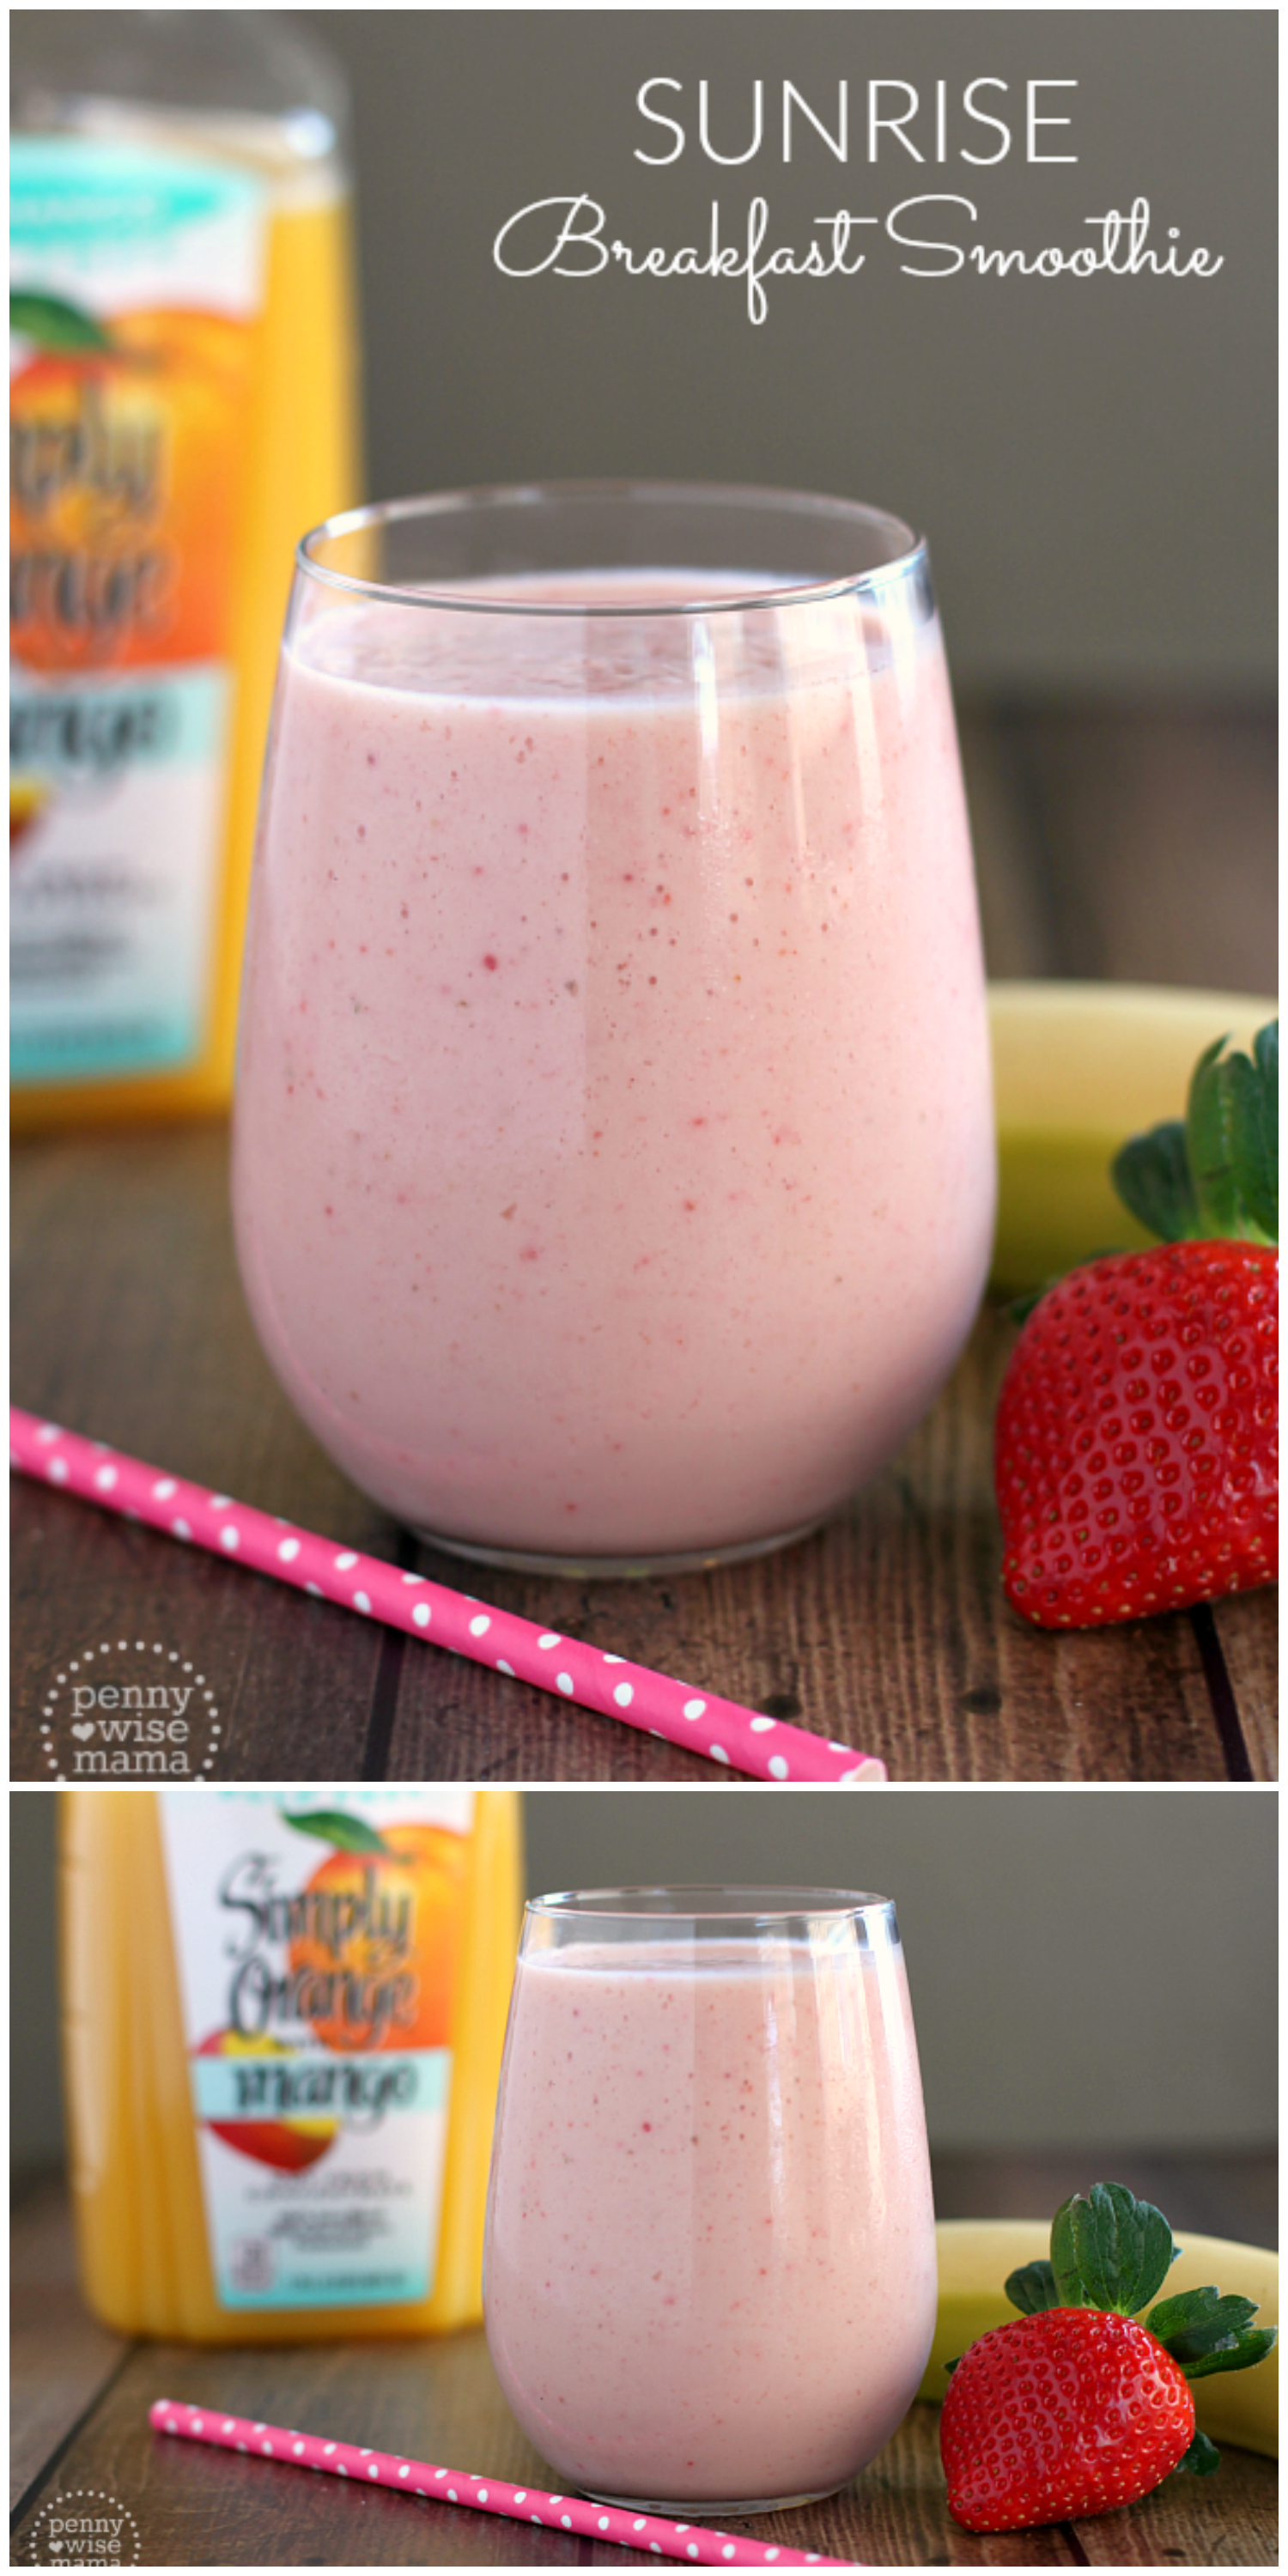 This Sunrise Breakfast Smoothie is satisfying and refreshing first thing in the morning. It's delicious and super easy to make. Perfect for busy mornings!